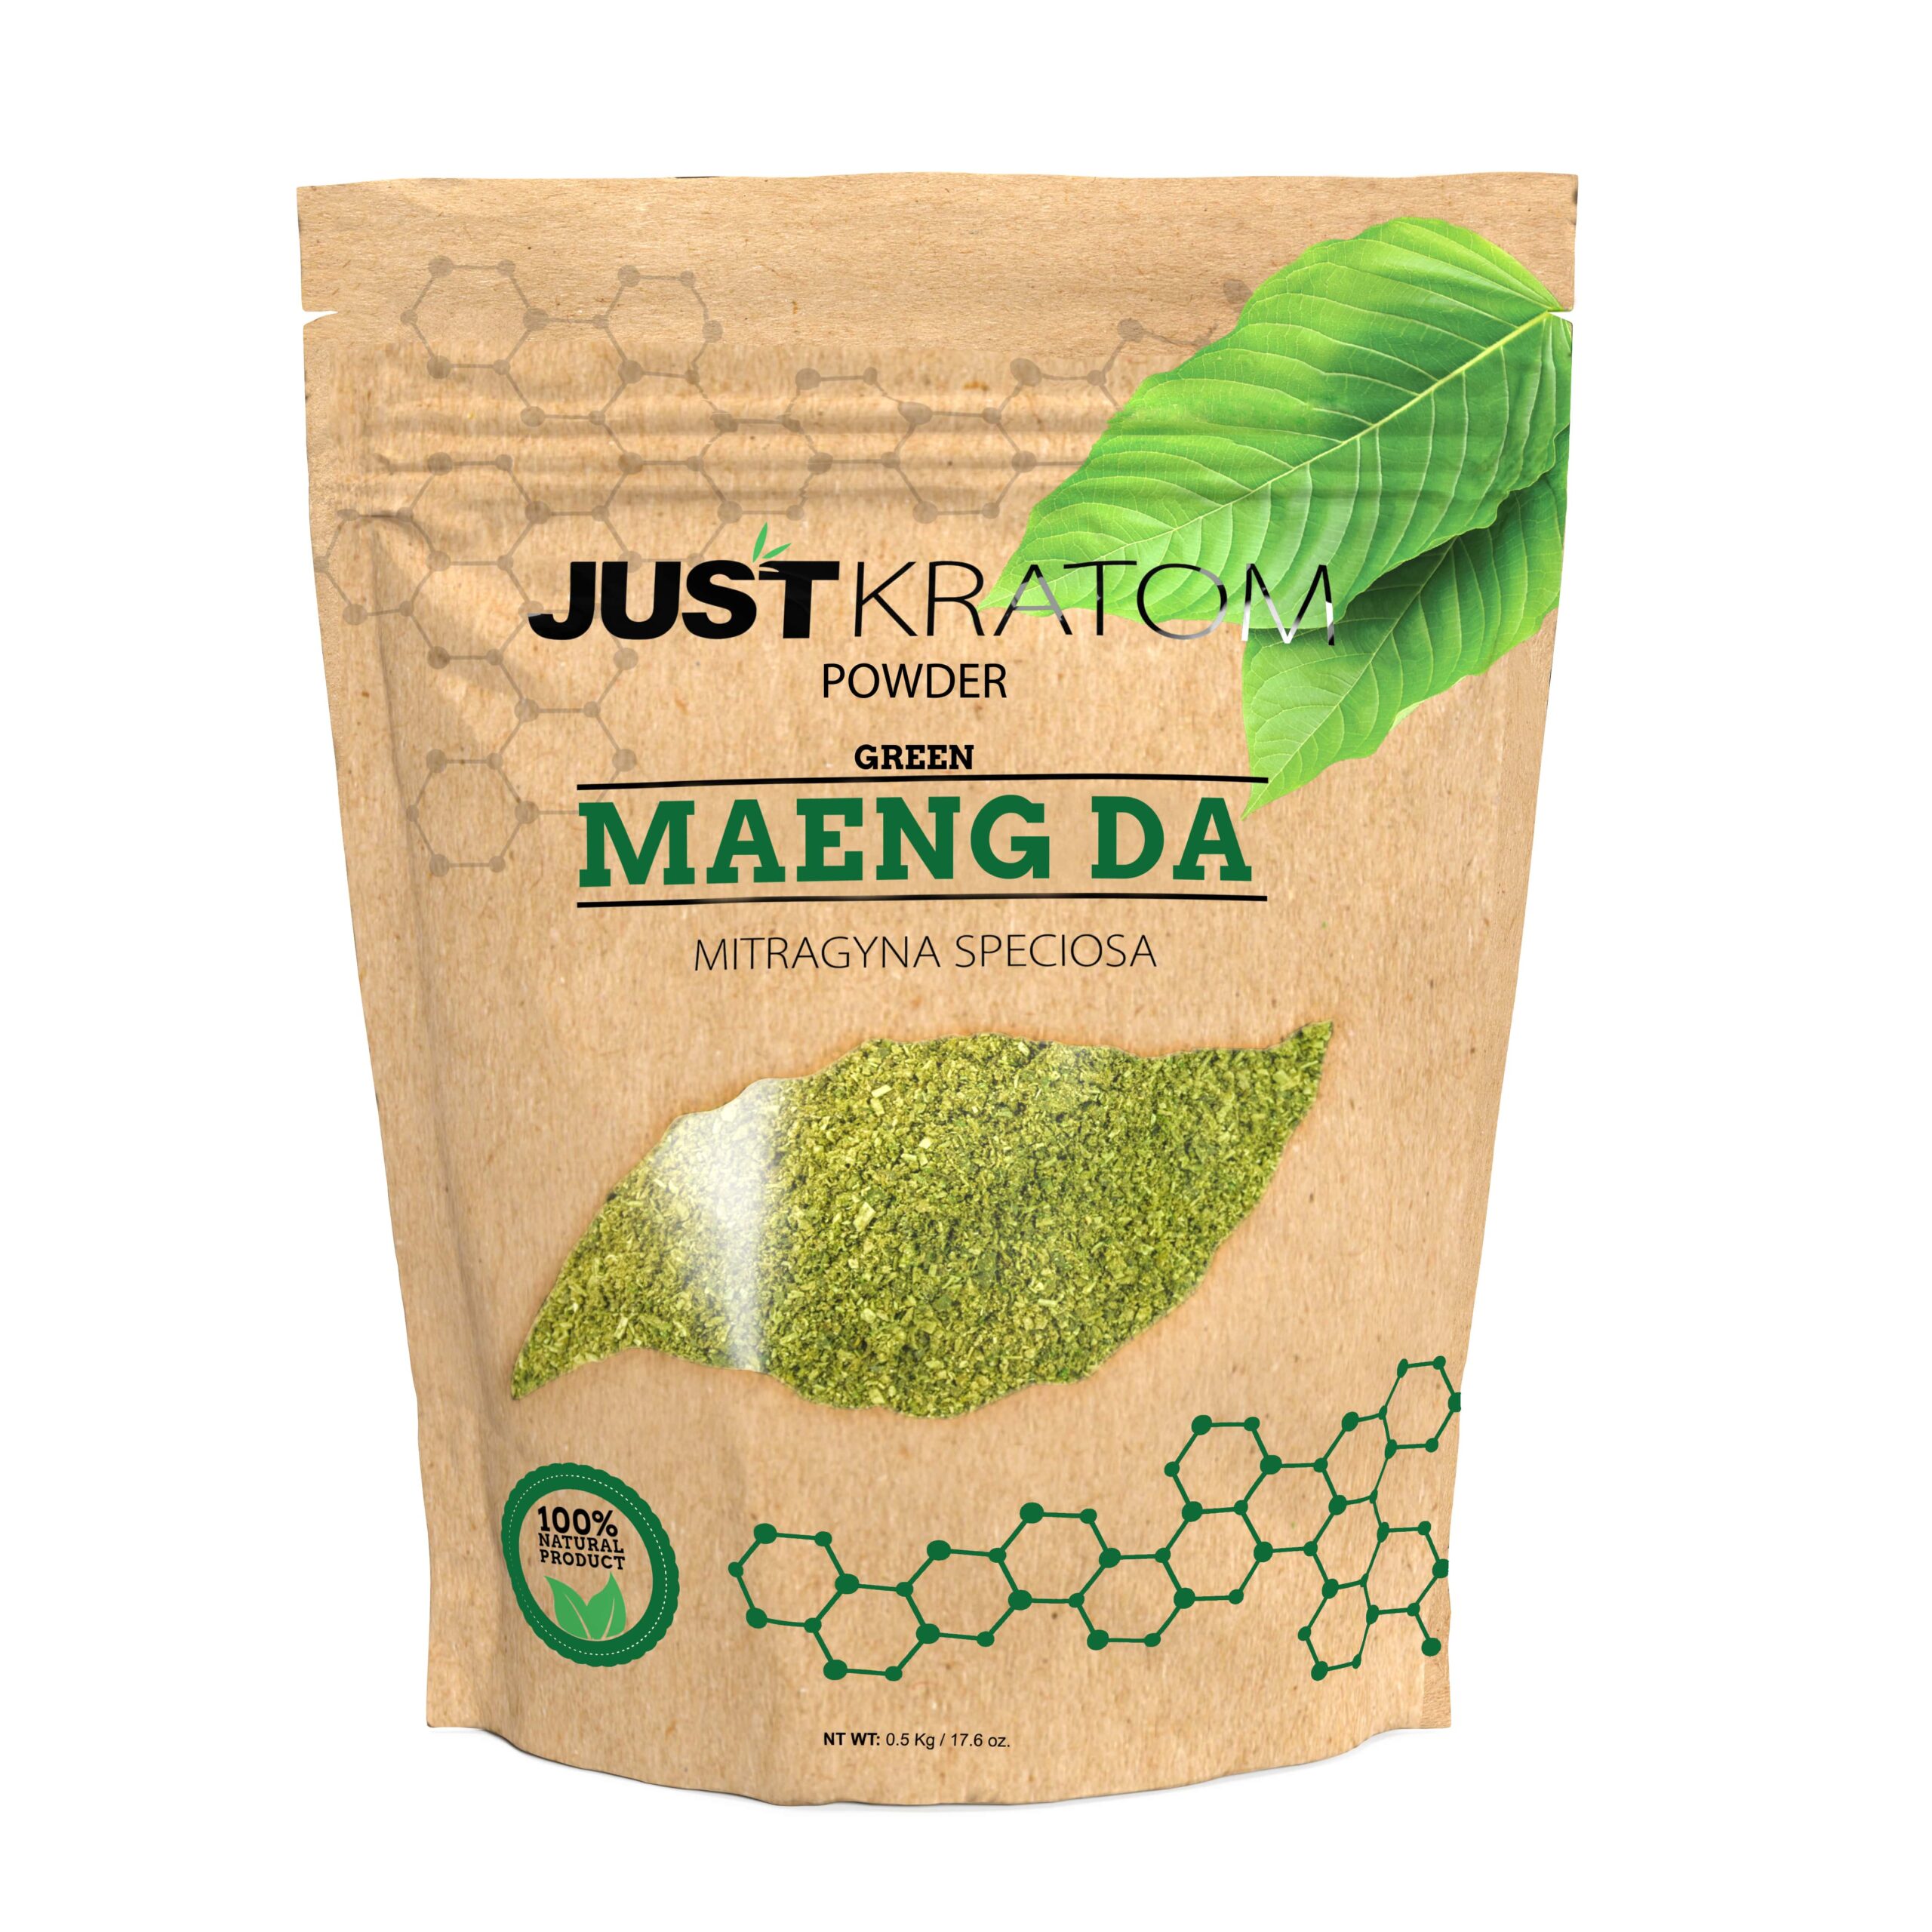 Kratom Powder By Just Kratom-Powdered Panorama: A Whirlwind Review of Just Kratom’s Spectrum of Botanical Marvels